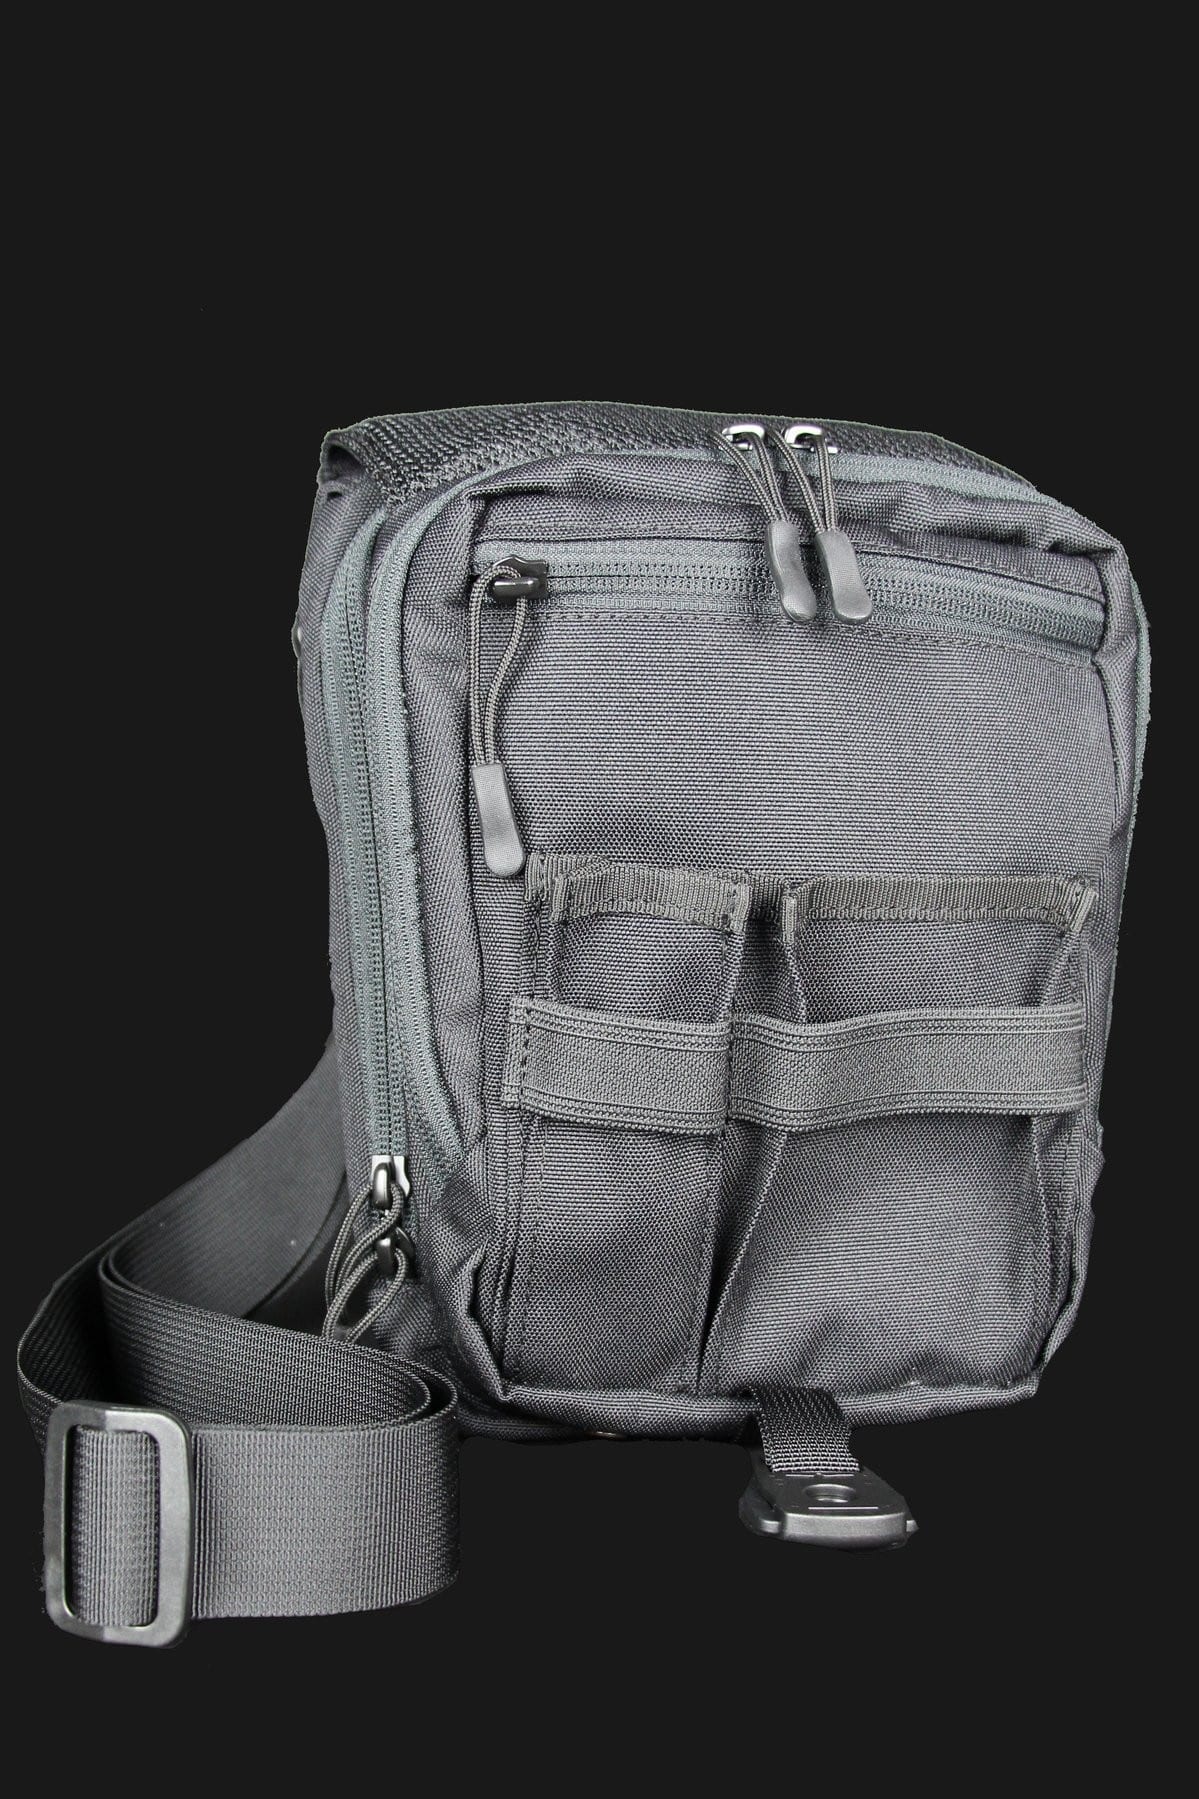 Sling Backpack With Concealed Gun Holster | IUCN Water